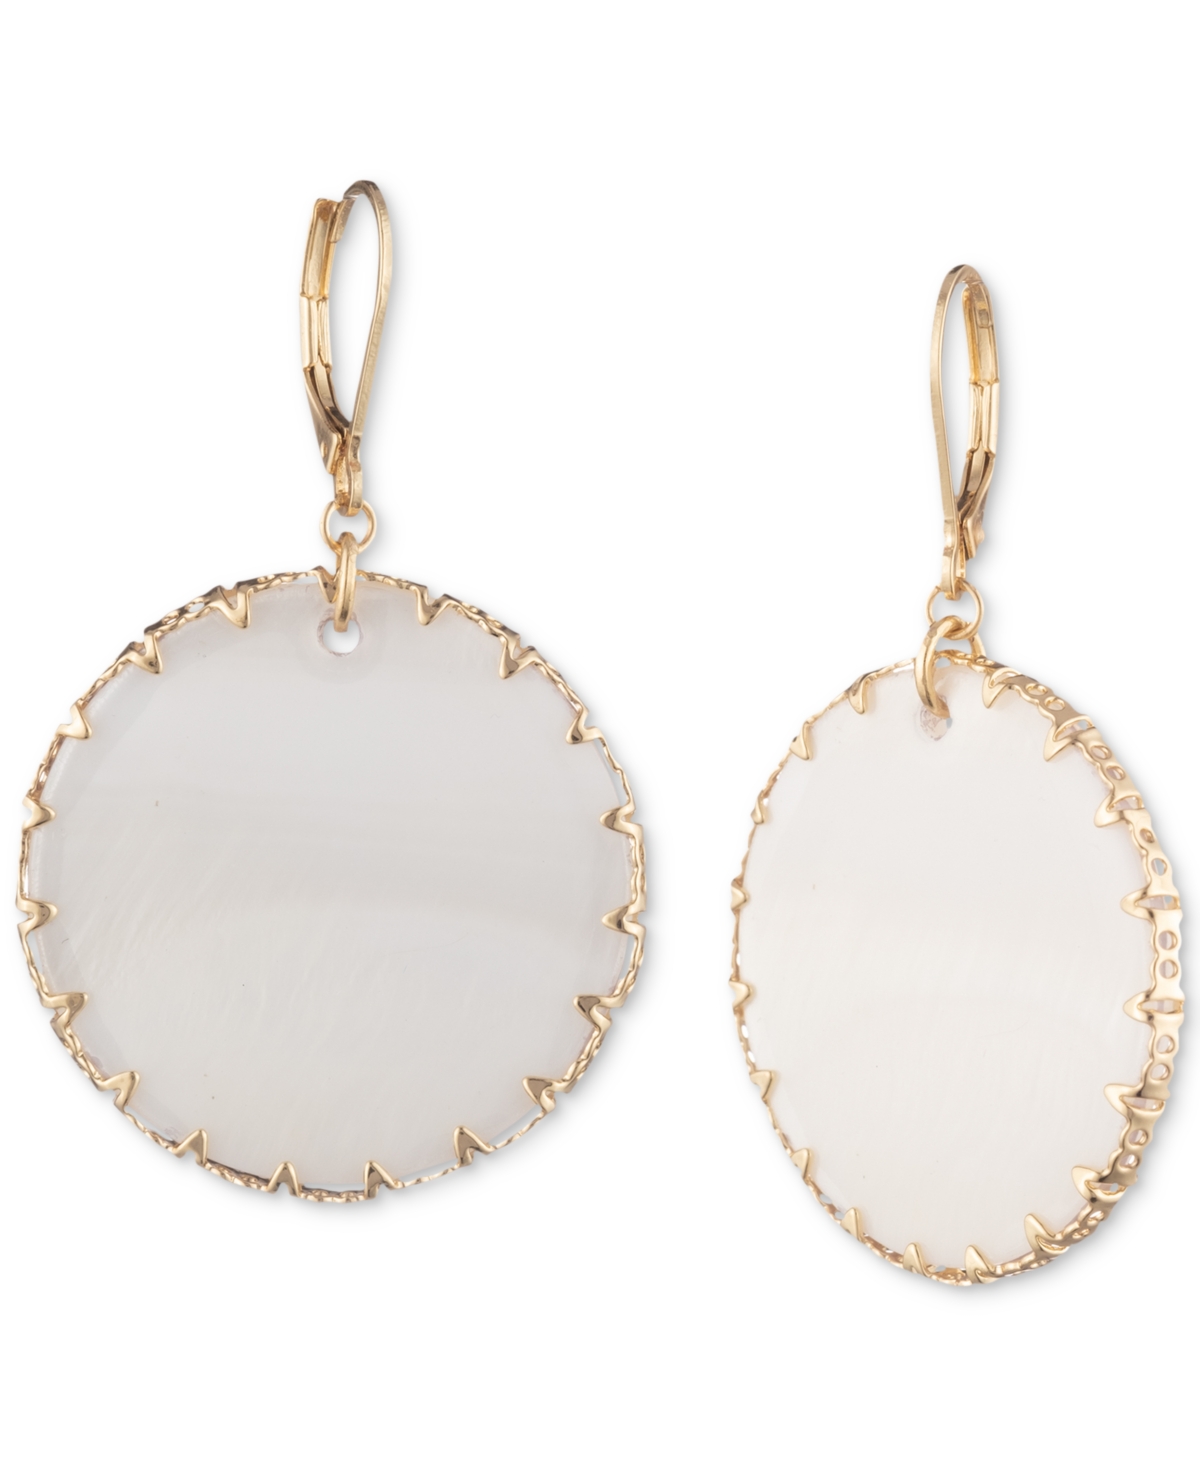 Gold-Tone & Colored Disc Drop Earrings - White